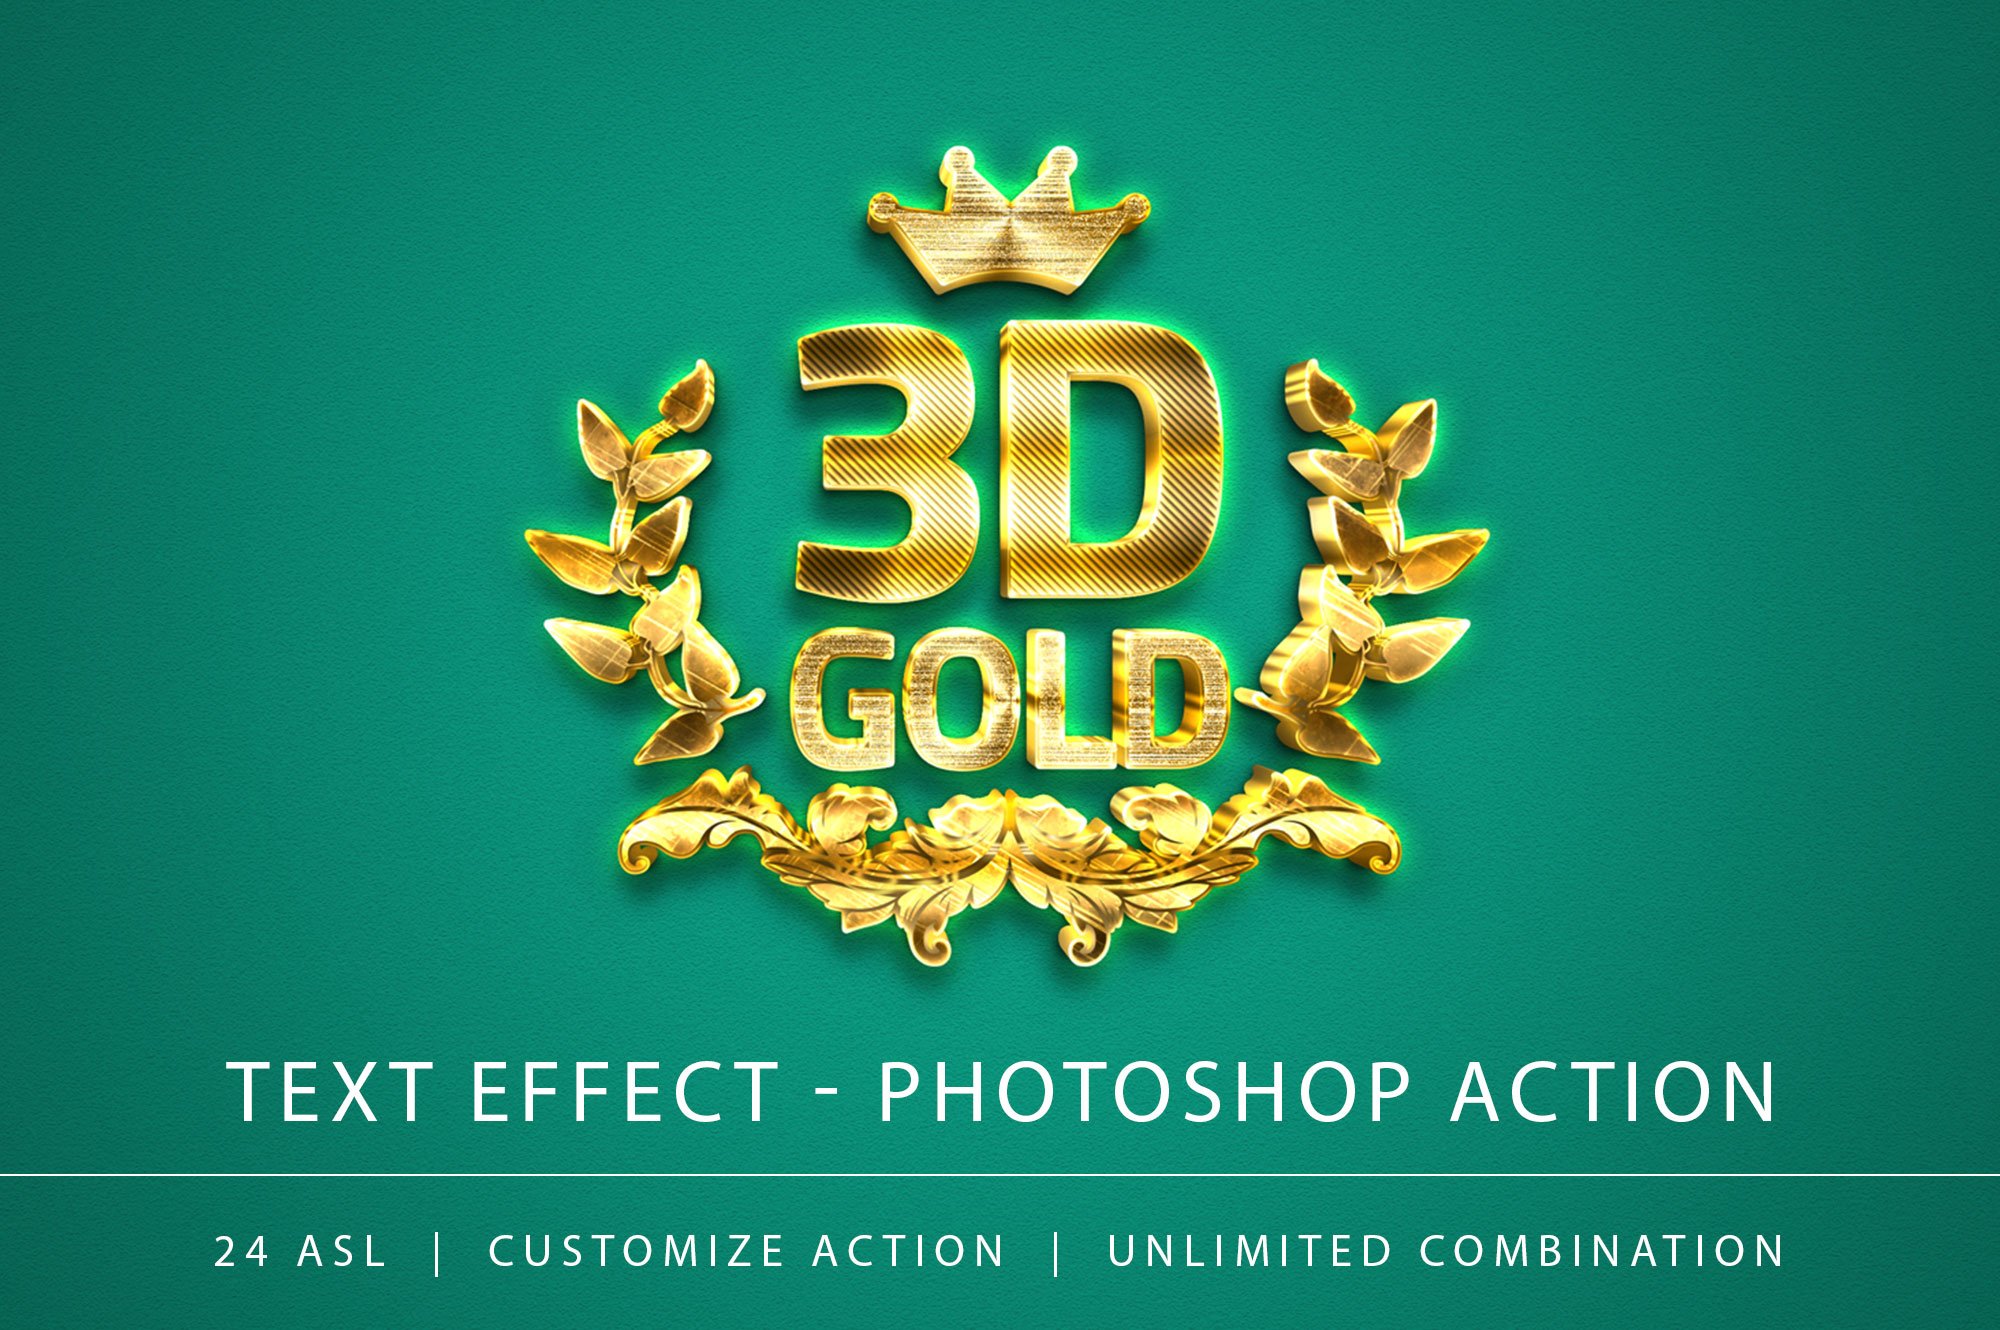 3D Gold Text Effectcover image.